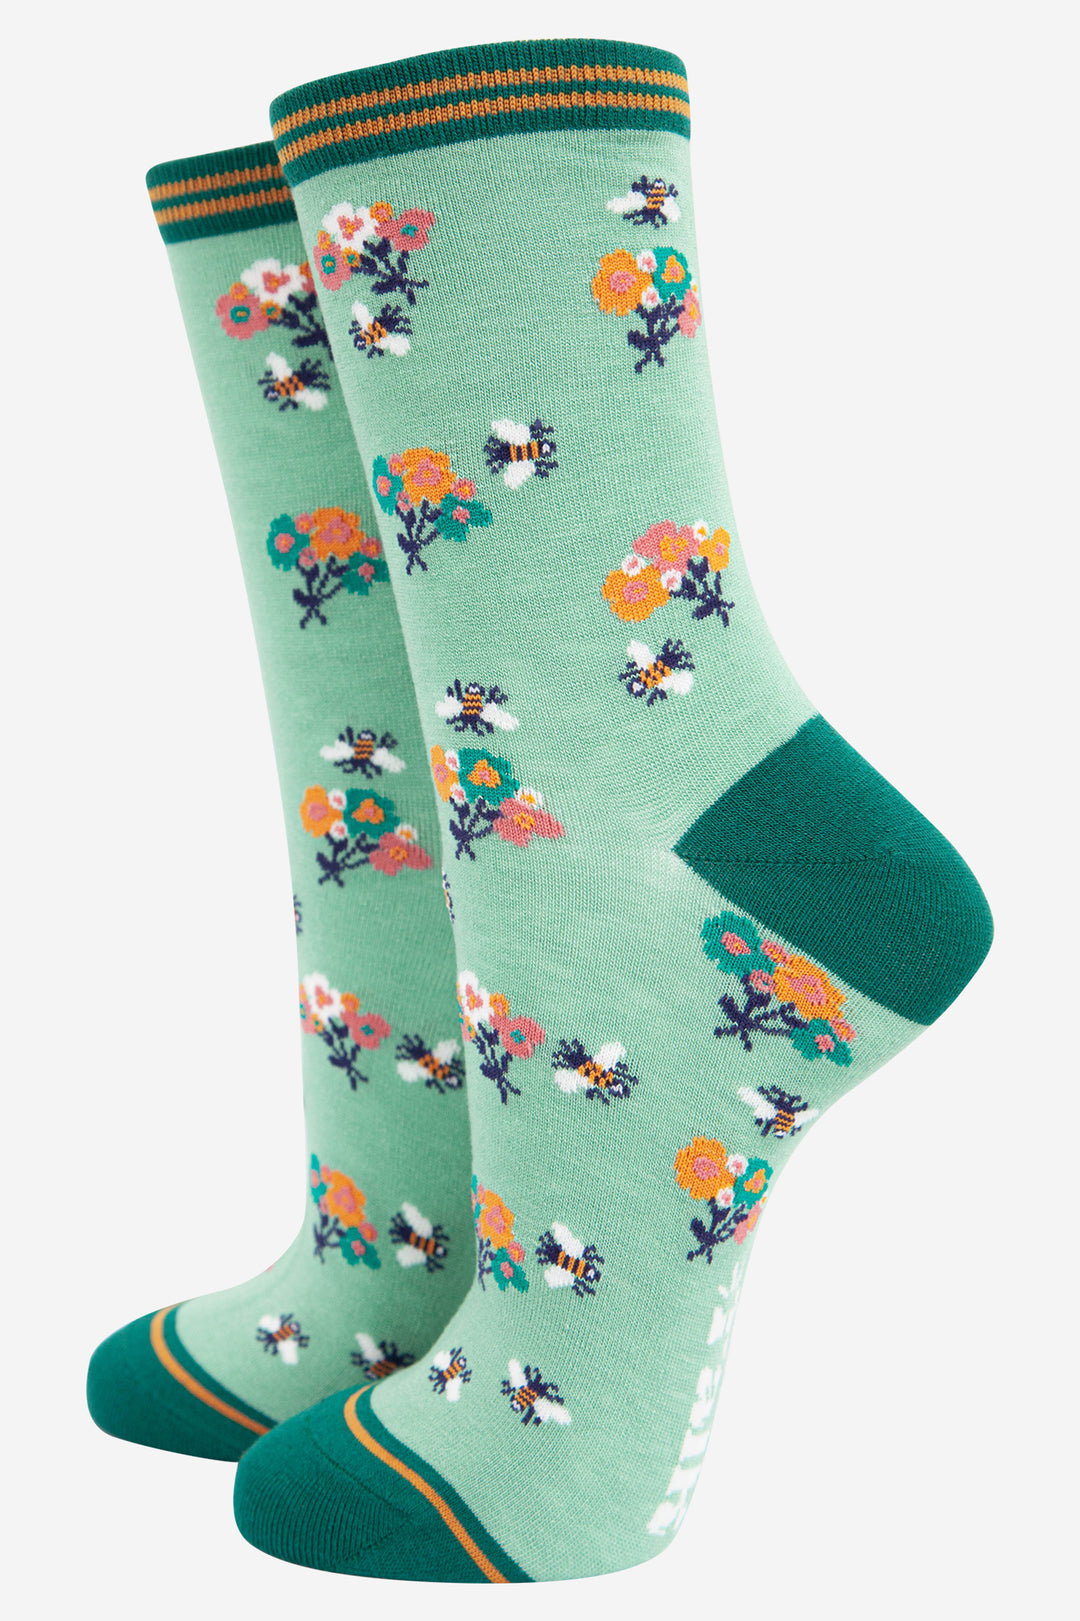 light green bamboo socks with an all over bee and floral posey pattern